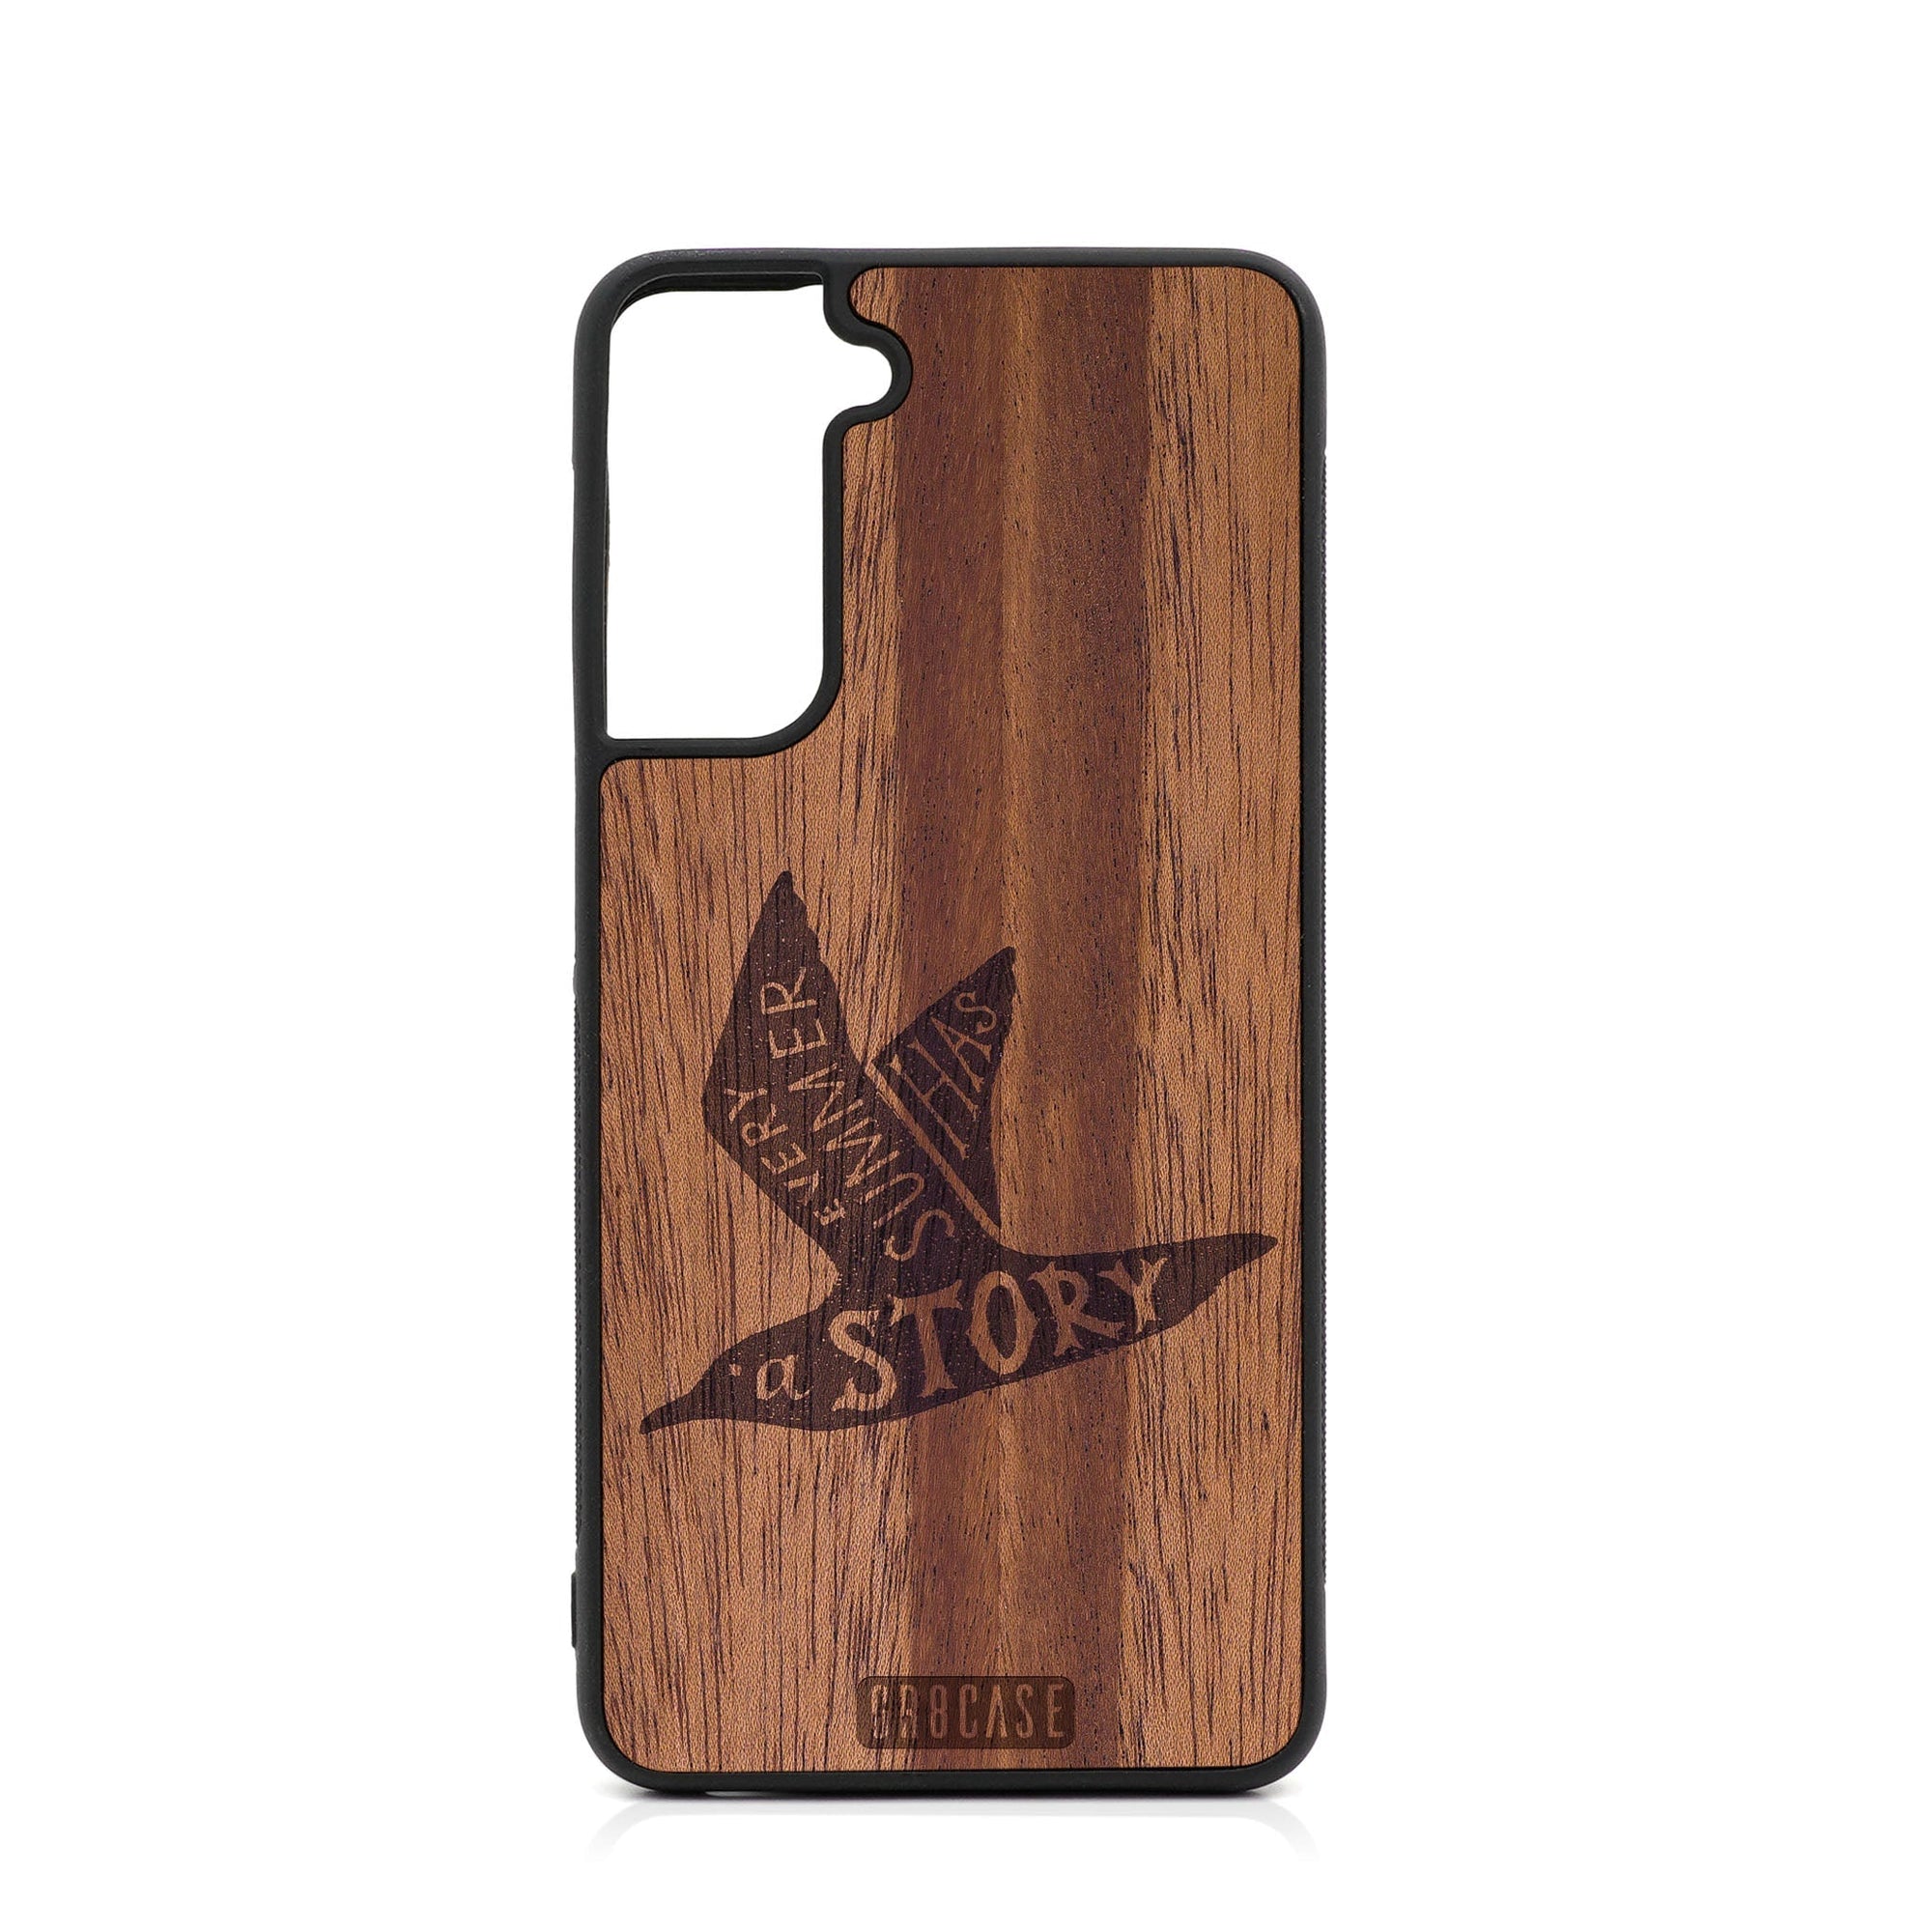 Every Summer Has A Story (Seagull) Design Wood Case For Samsung Galaxy S21 FE 5G